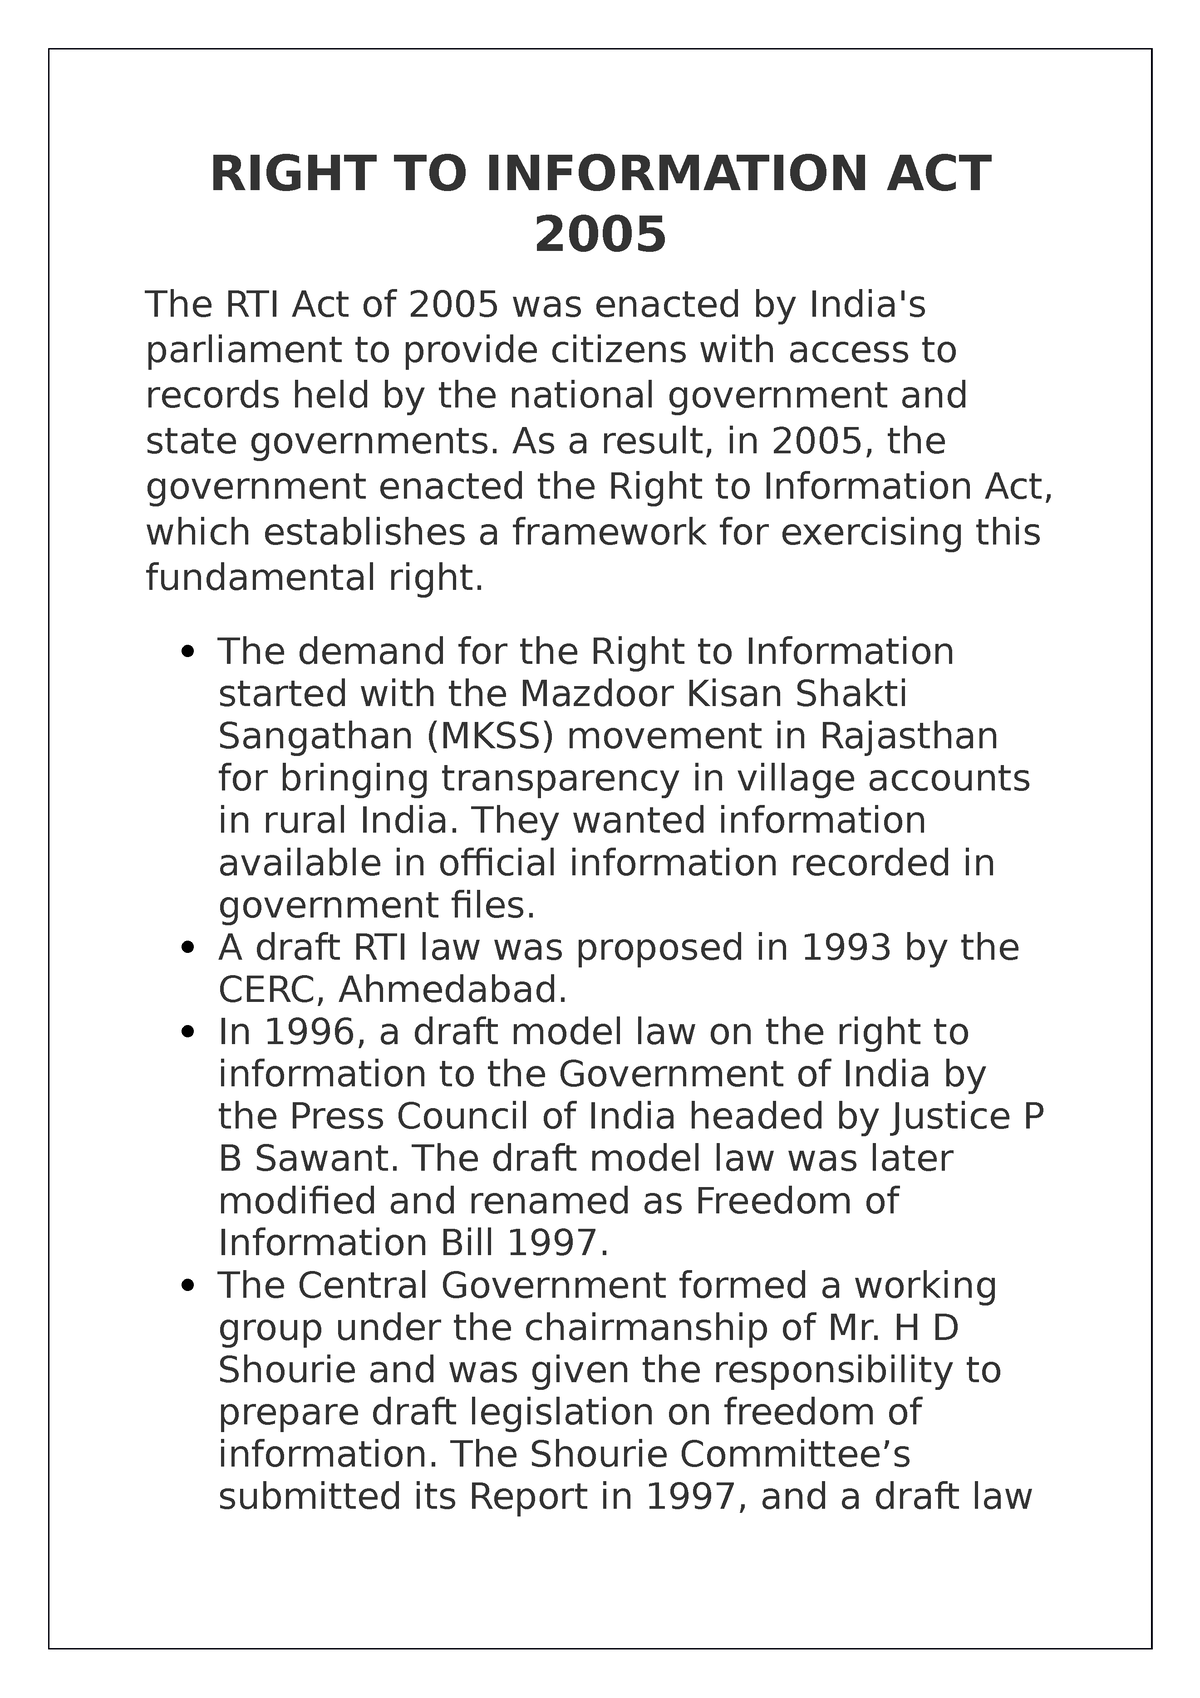 essay on right to information act